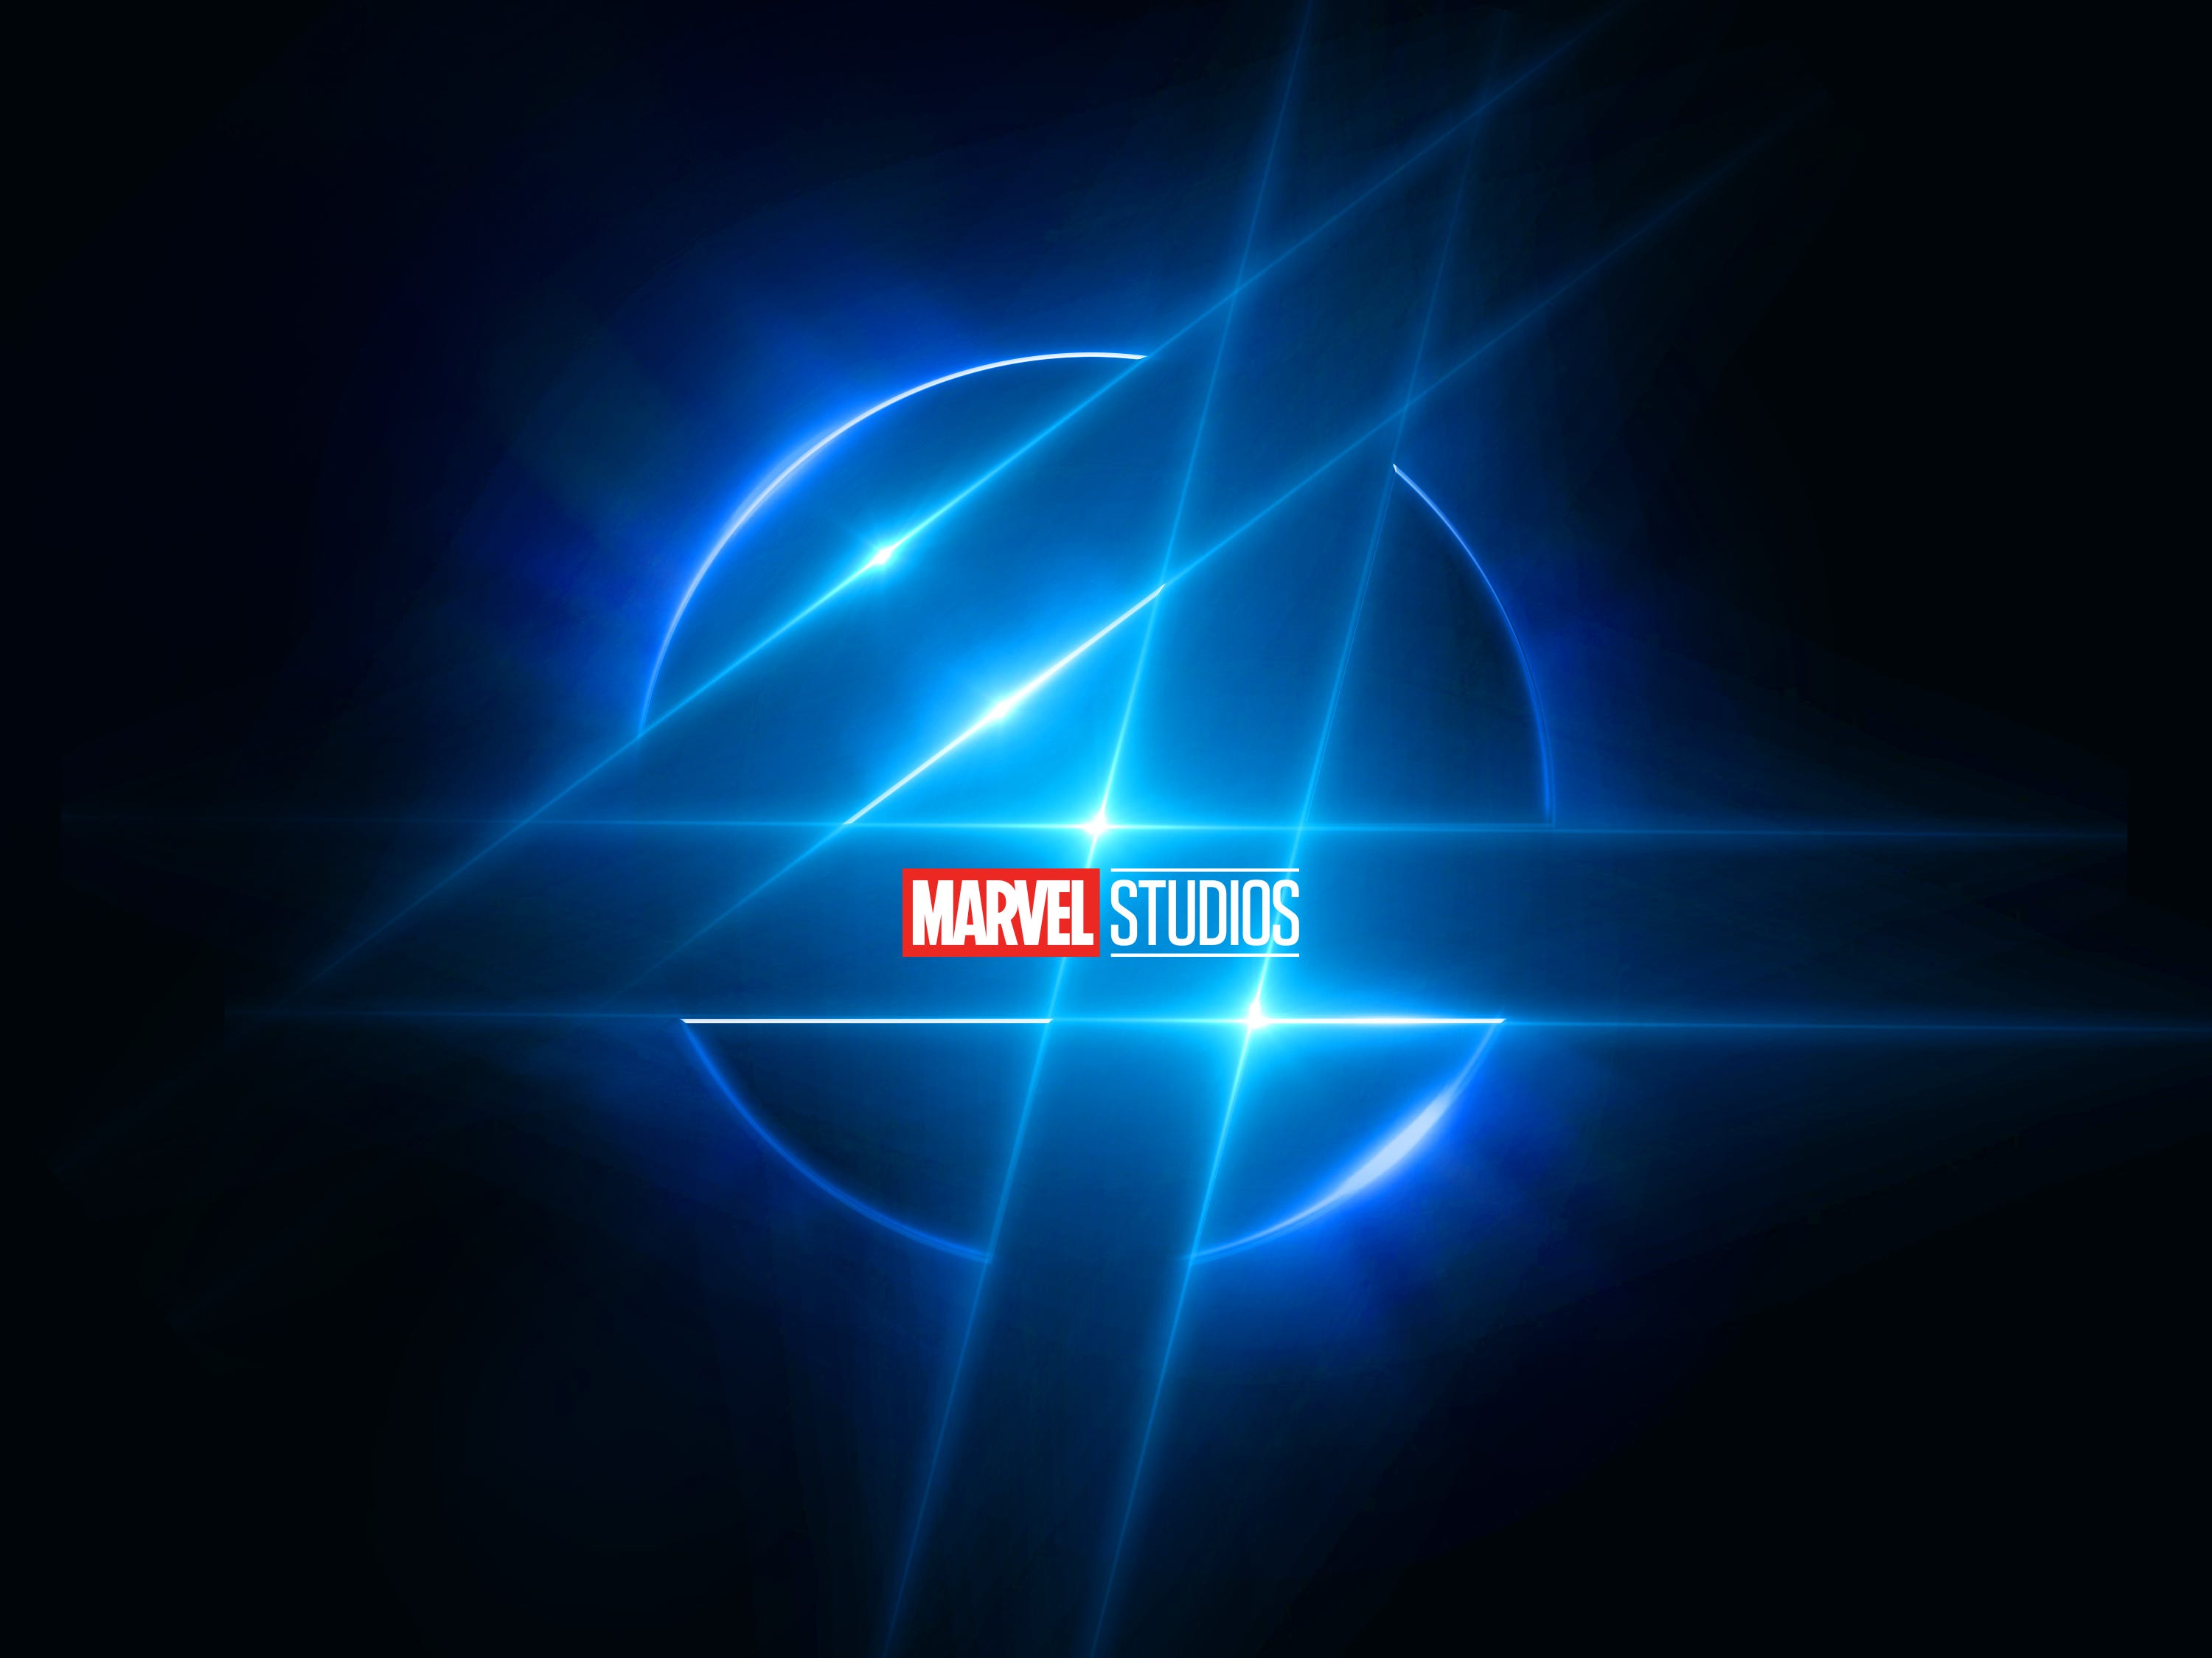 <p>First announced several years ago, Marvel Studios head Kevin Feige confirmed at the 2022 San Diego Comic-Con that the "Fantastic Four" reboot will kick off Phase Six of the MCU.</p><p>At D23 Expo in 2022, Feige revealed that "WandaVision" director Matt Shakman will direct the reboot. No cast has been named yet for the film.</p>